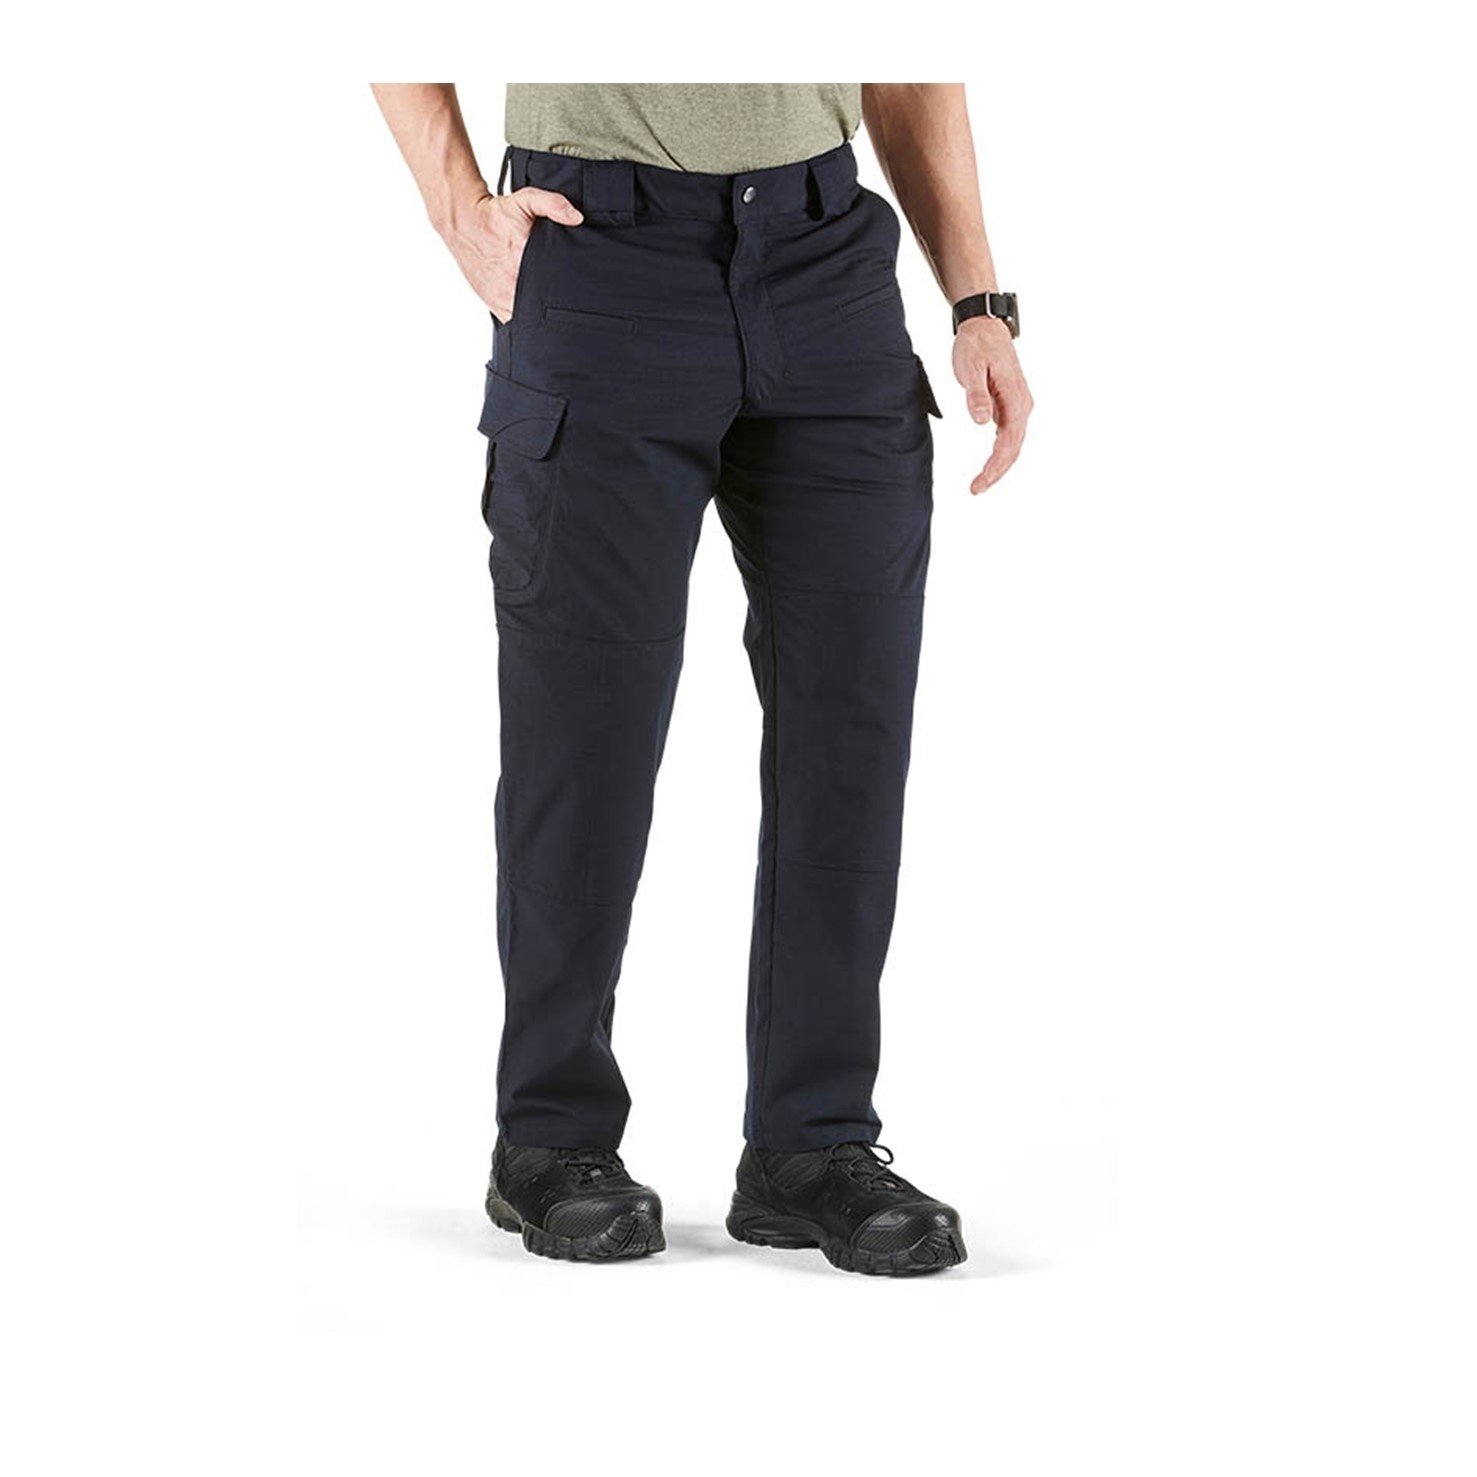 511 Tactical Heavy Cargo Utility Pants Navy 12  Womens black cargo pants  Womens tactical pants Utility pants